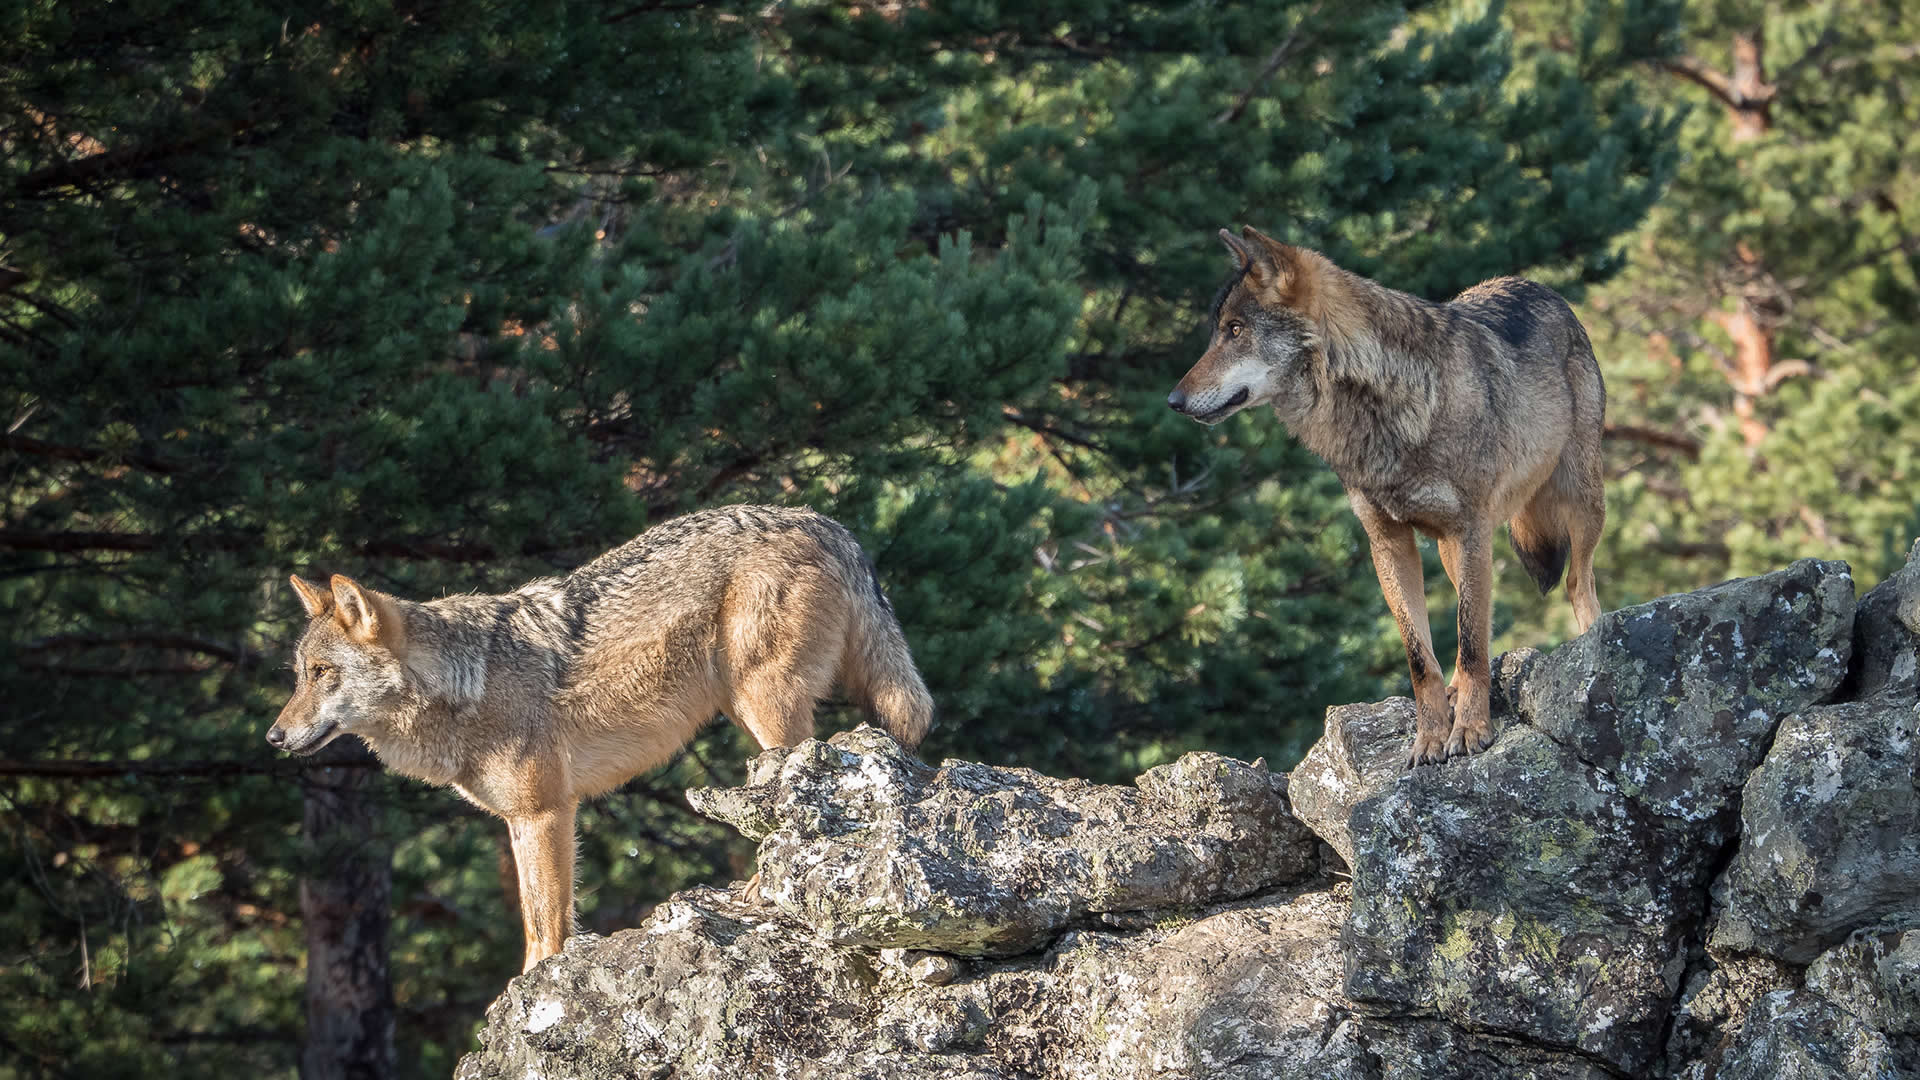 Volunteer at a wolf sanctuary in a Portuguese National Park